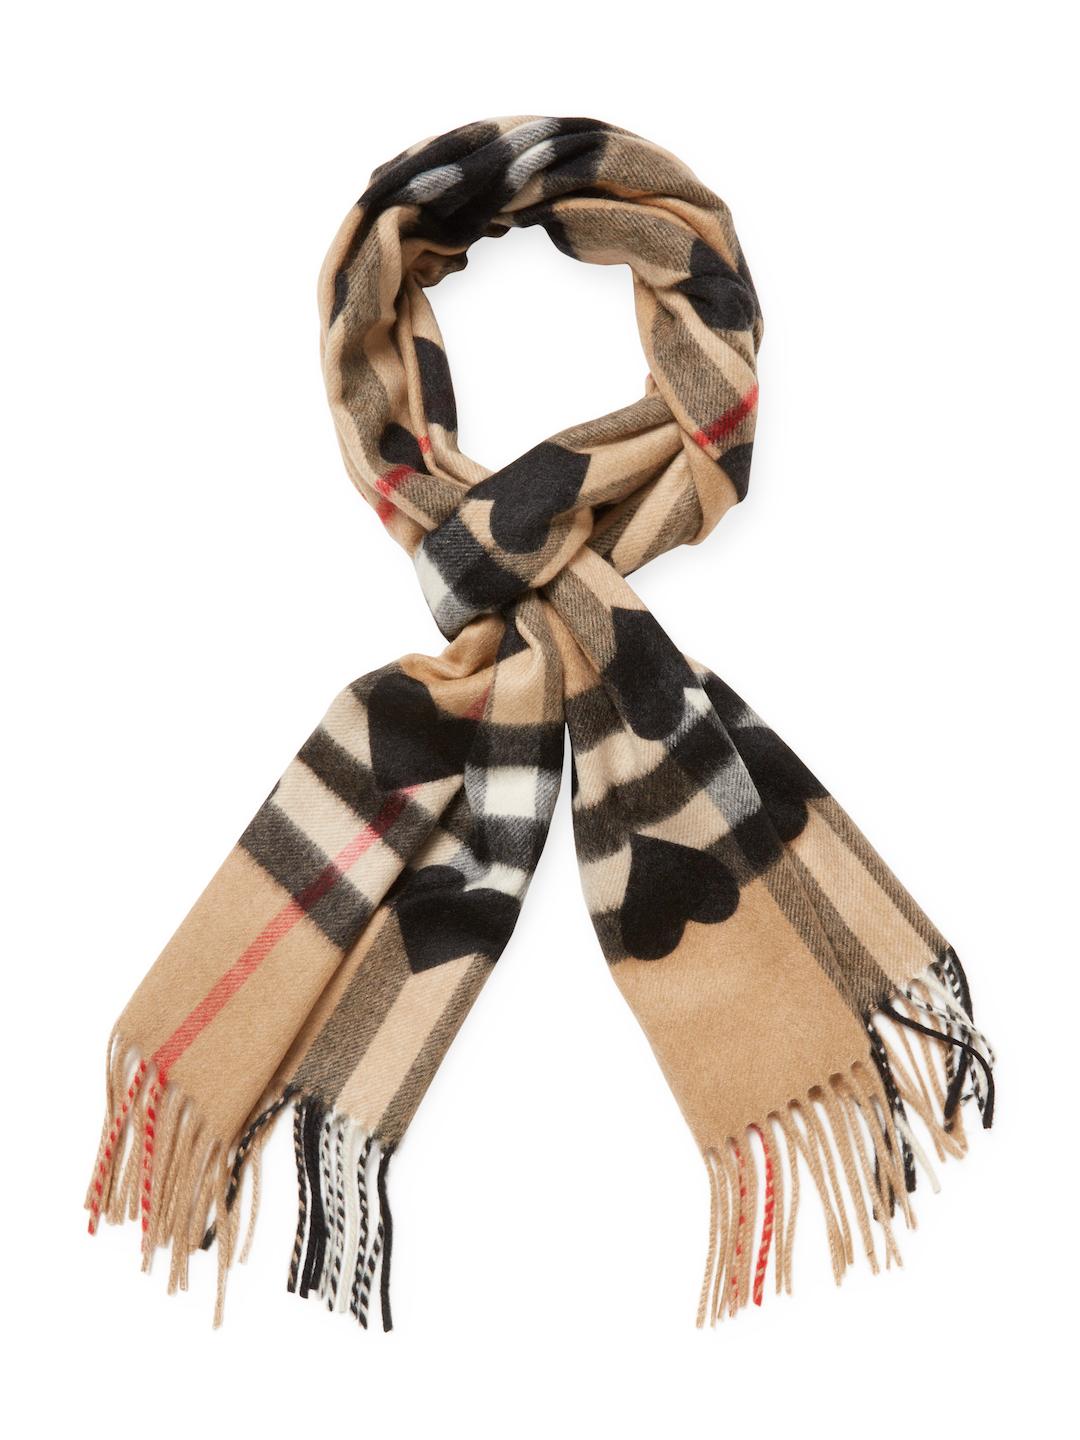 Burberry Cashmere Heart Scarf, 60